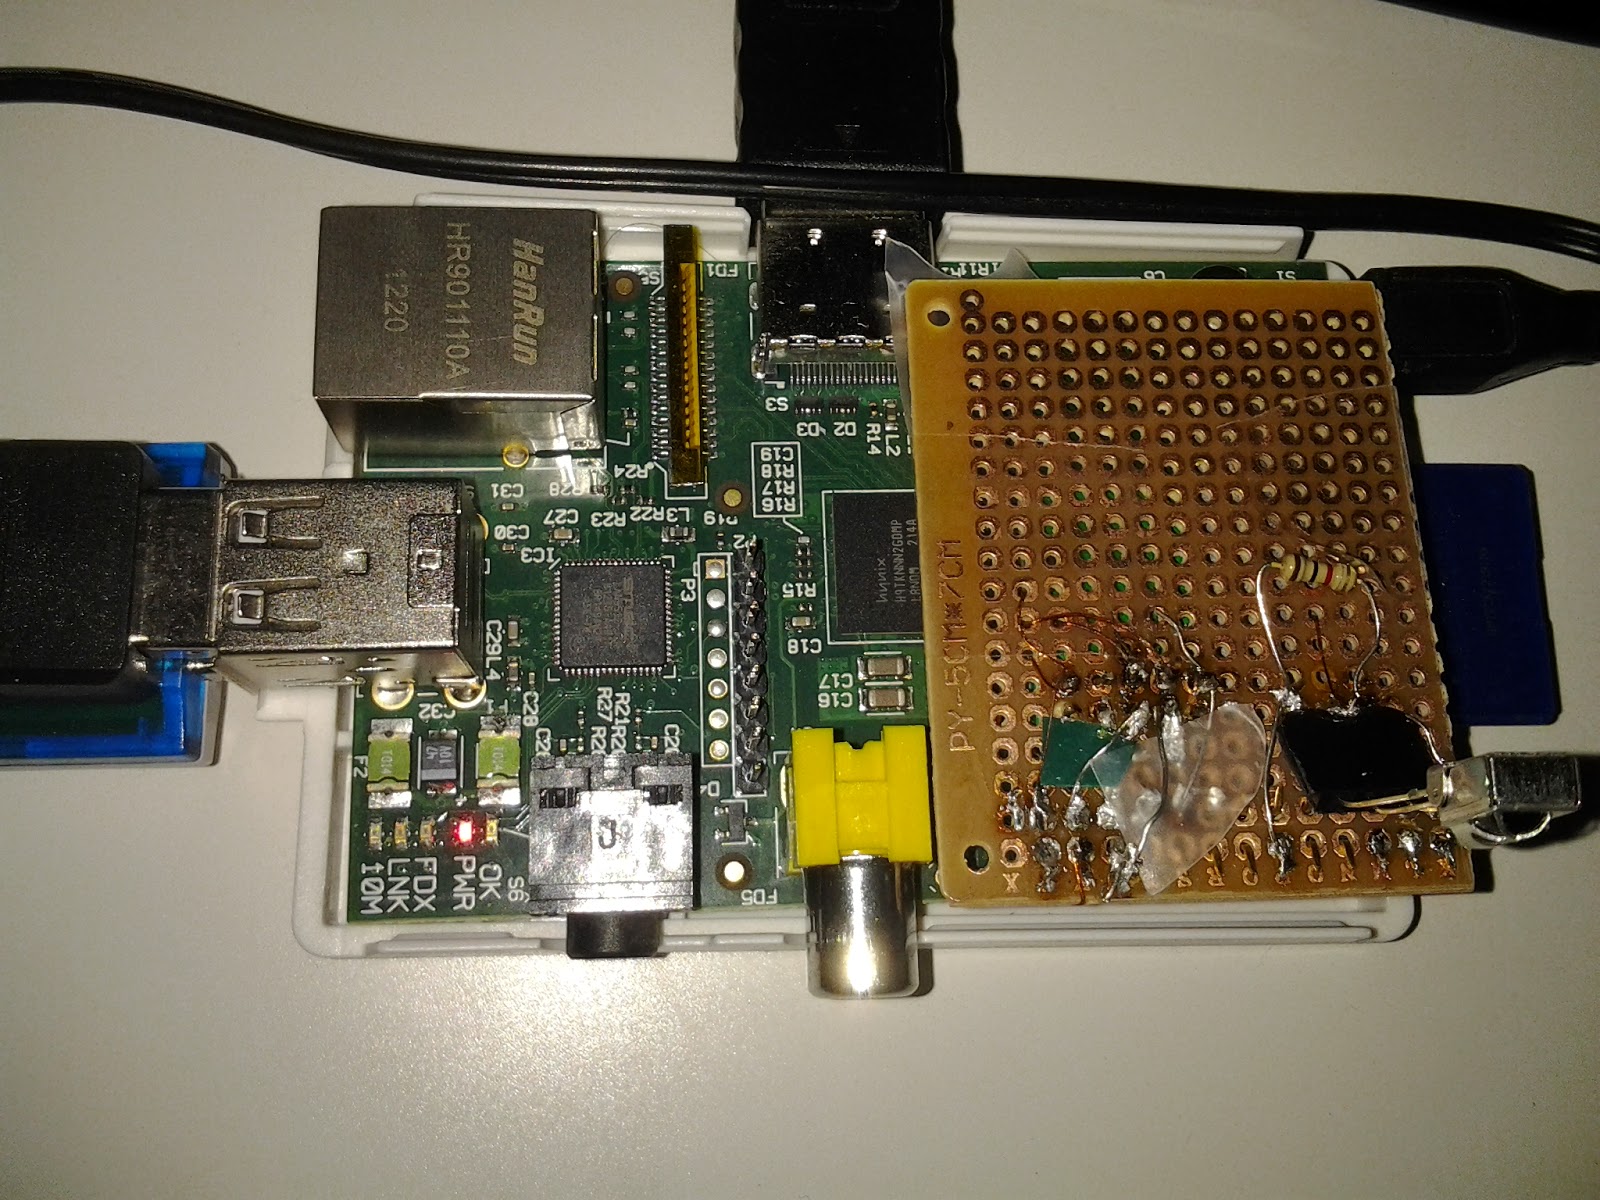 Raspberry pi as an nrf24l01 base station with python for smart home or internet of anything projects